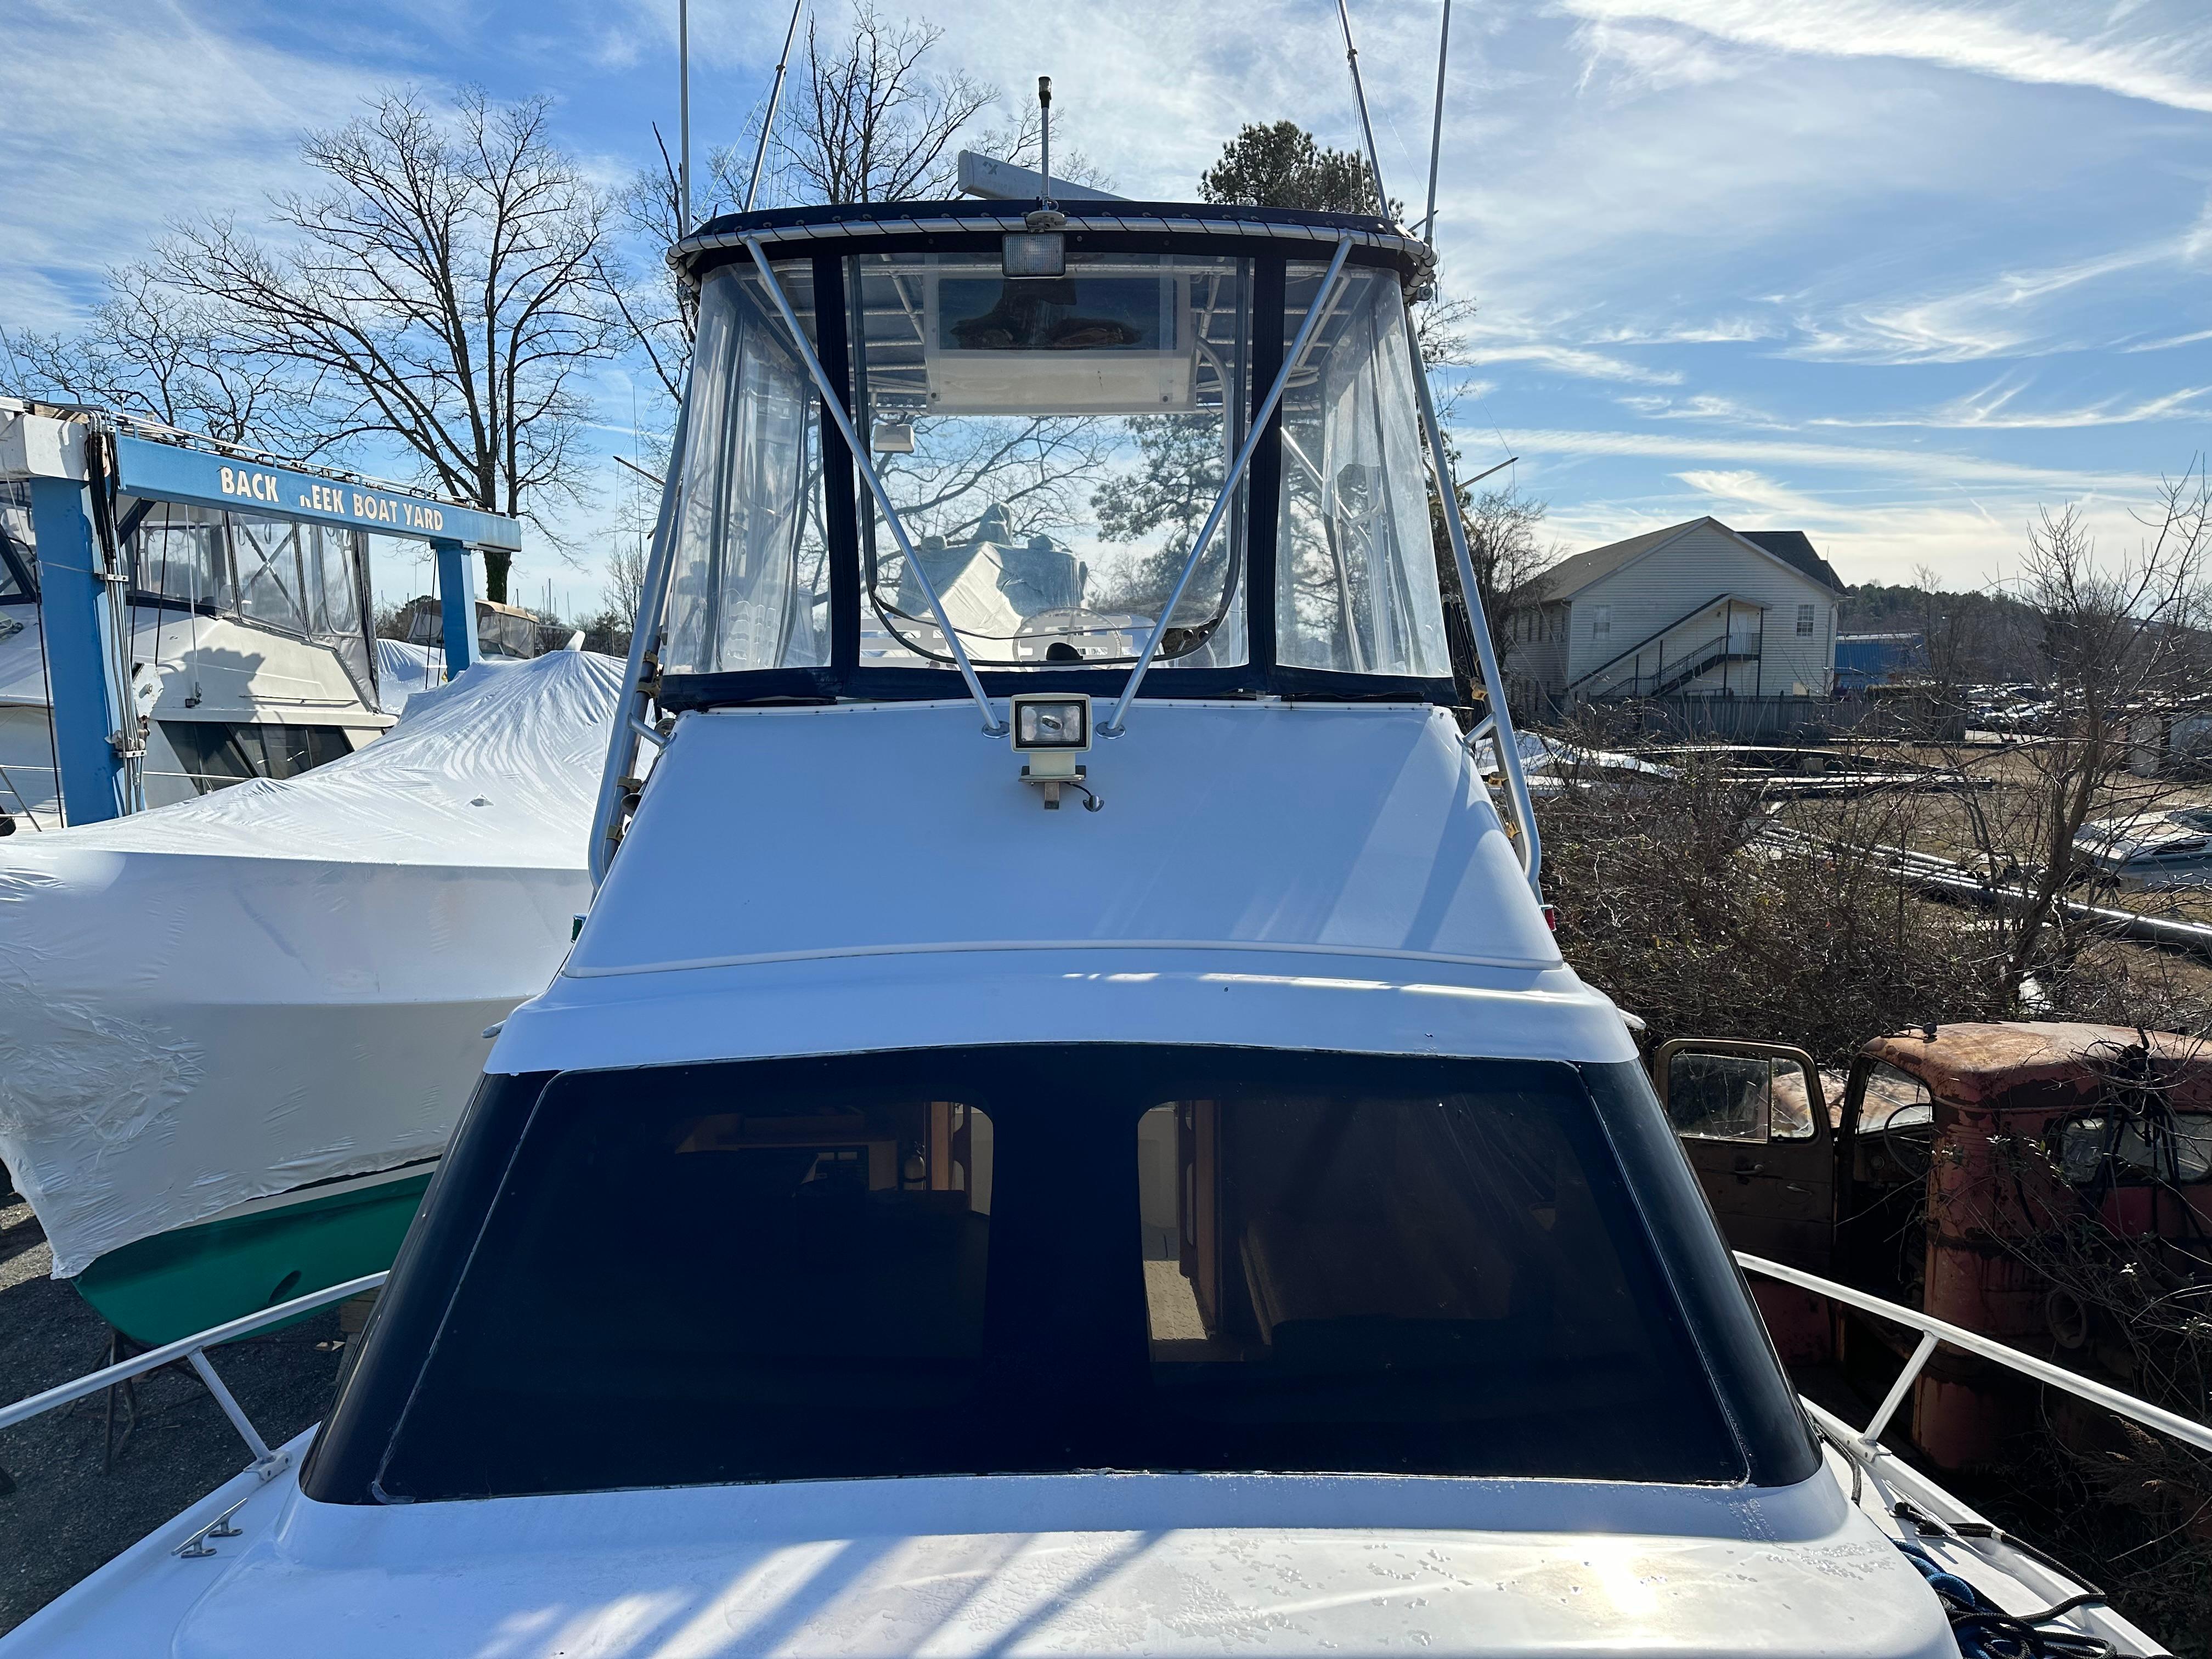 MARBEC Yacht Brokers Of Annapolis